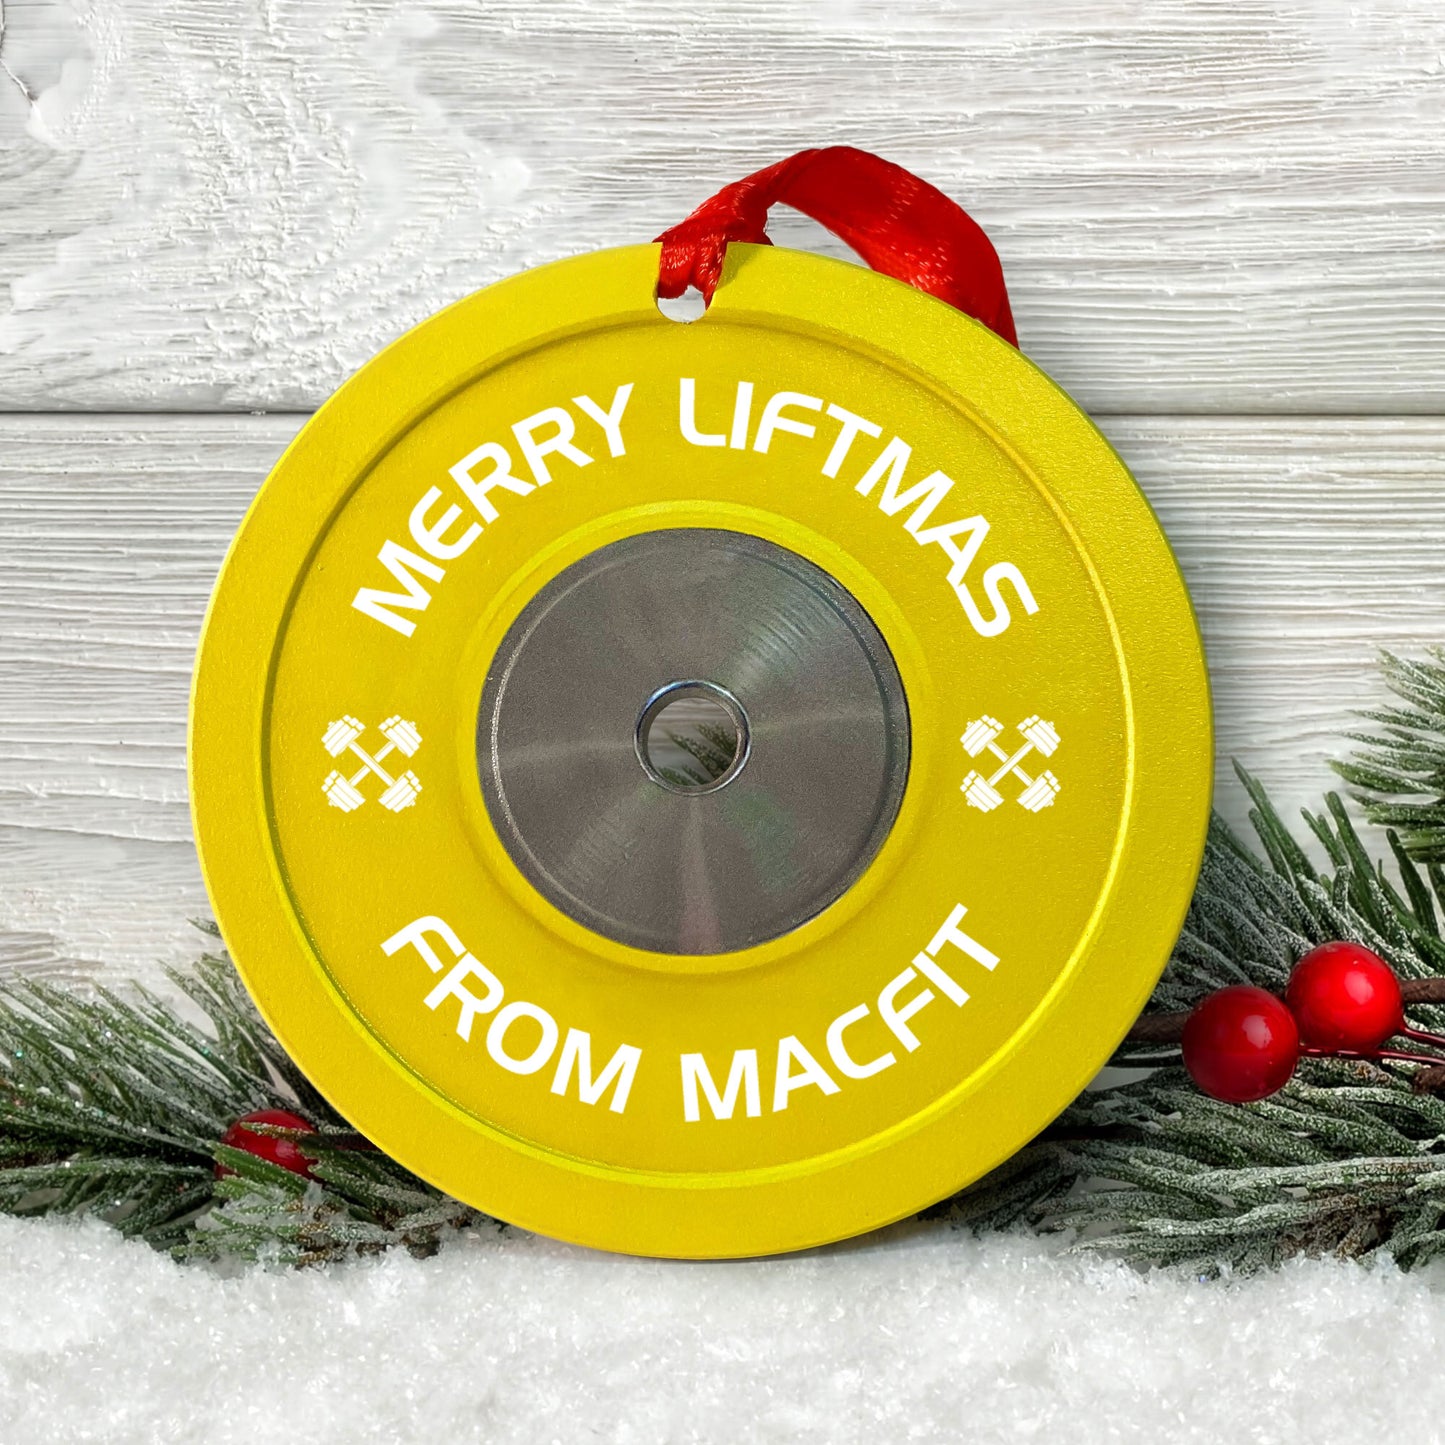 [Only available in the U.S] Merry Liftmas Weight Plates - Personalized Aluminum Ornament - Christmas Fitness Gym Weightlifting Gift For Gymer, Weightlifters, PTs